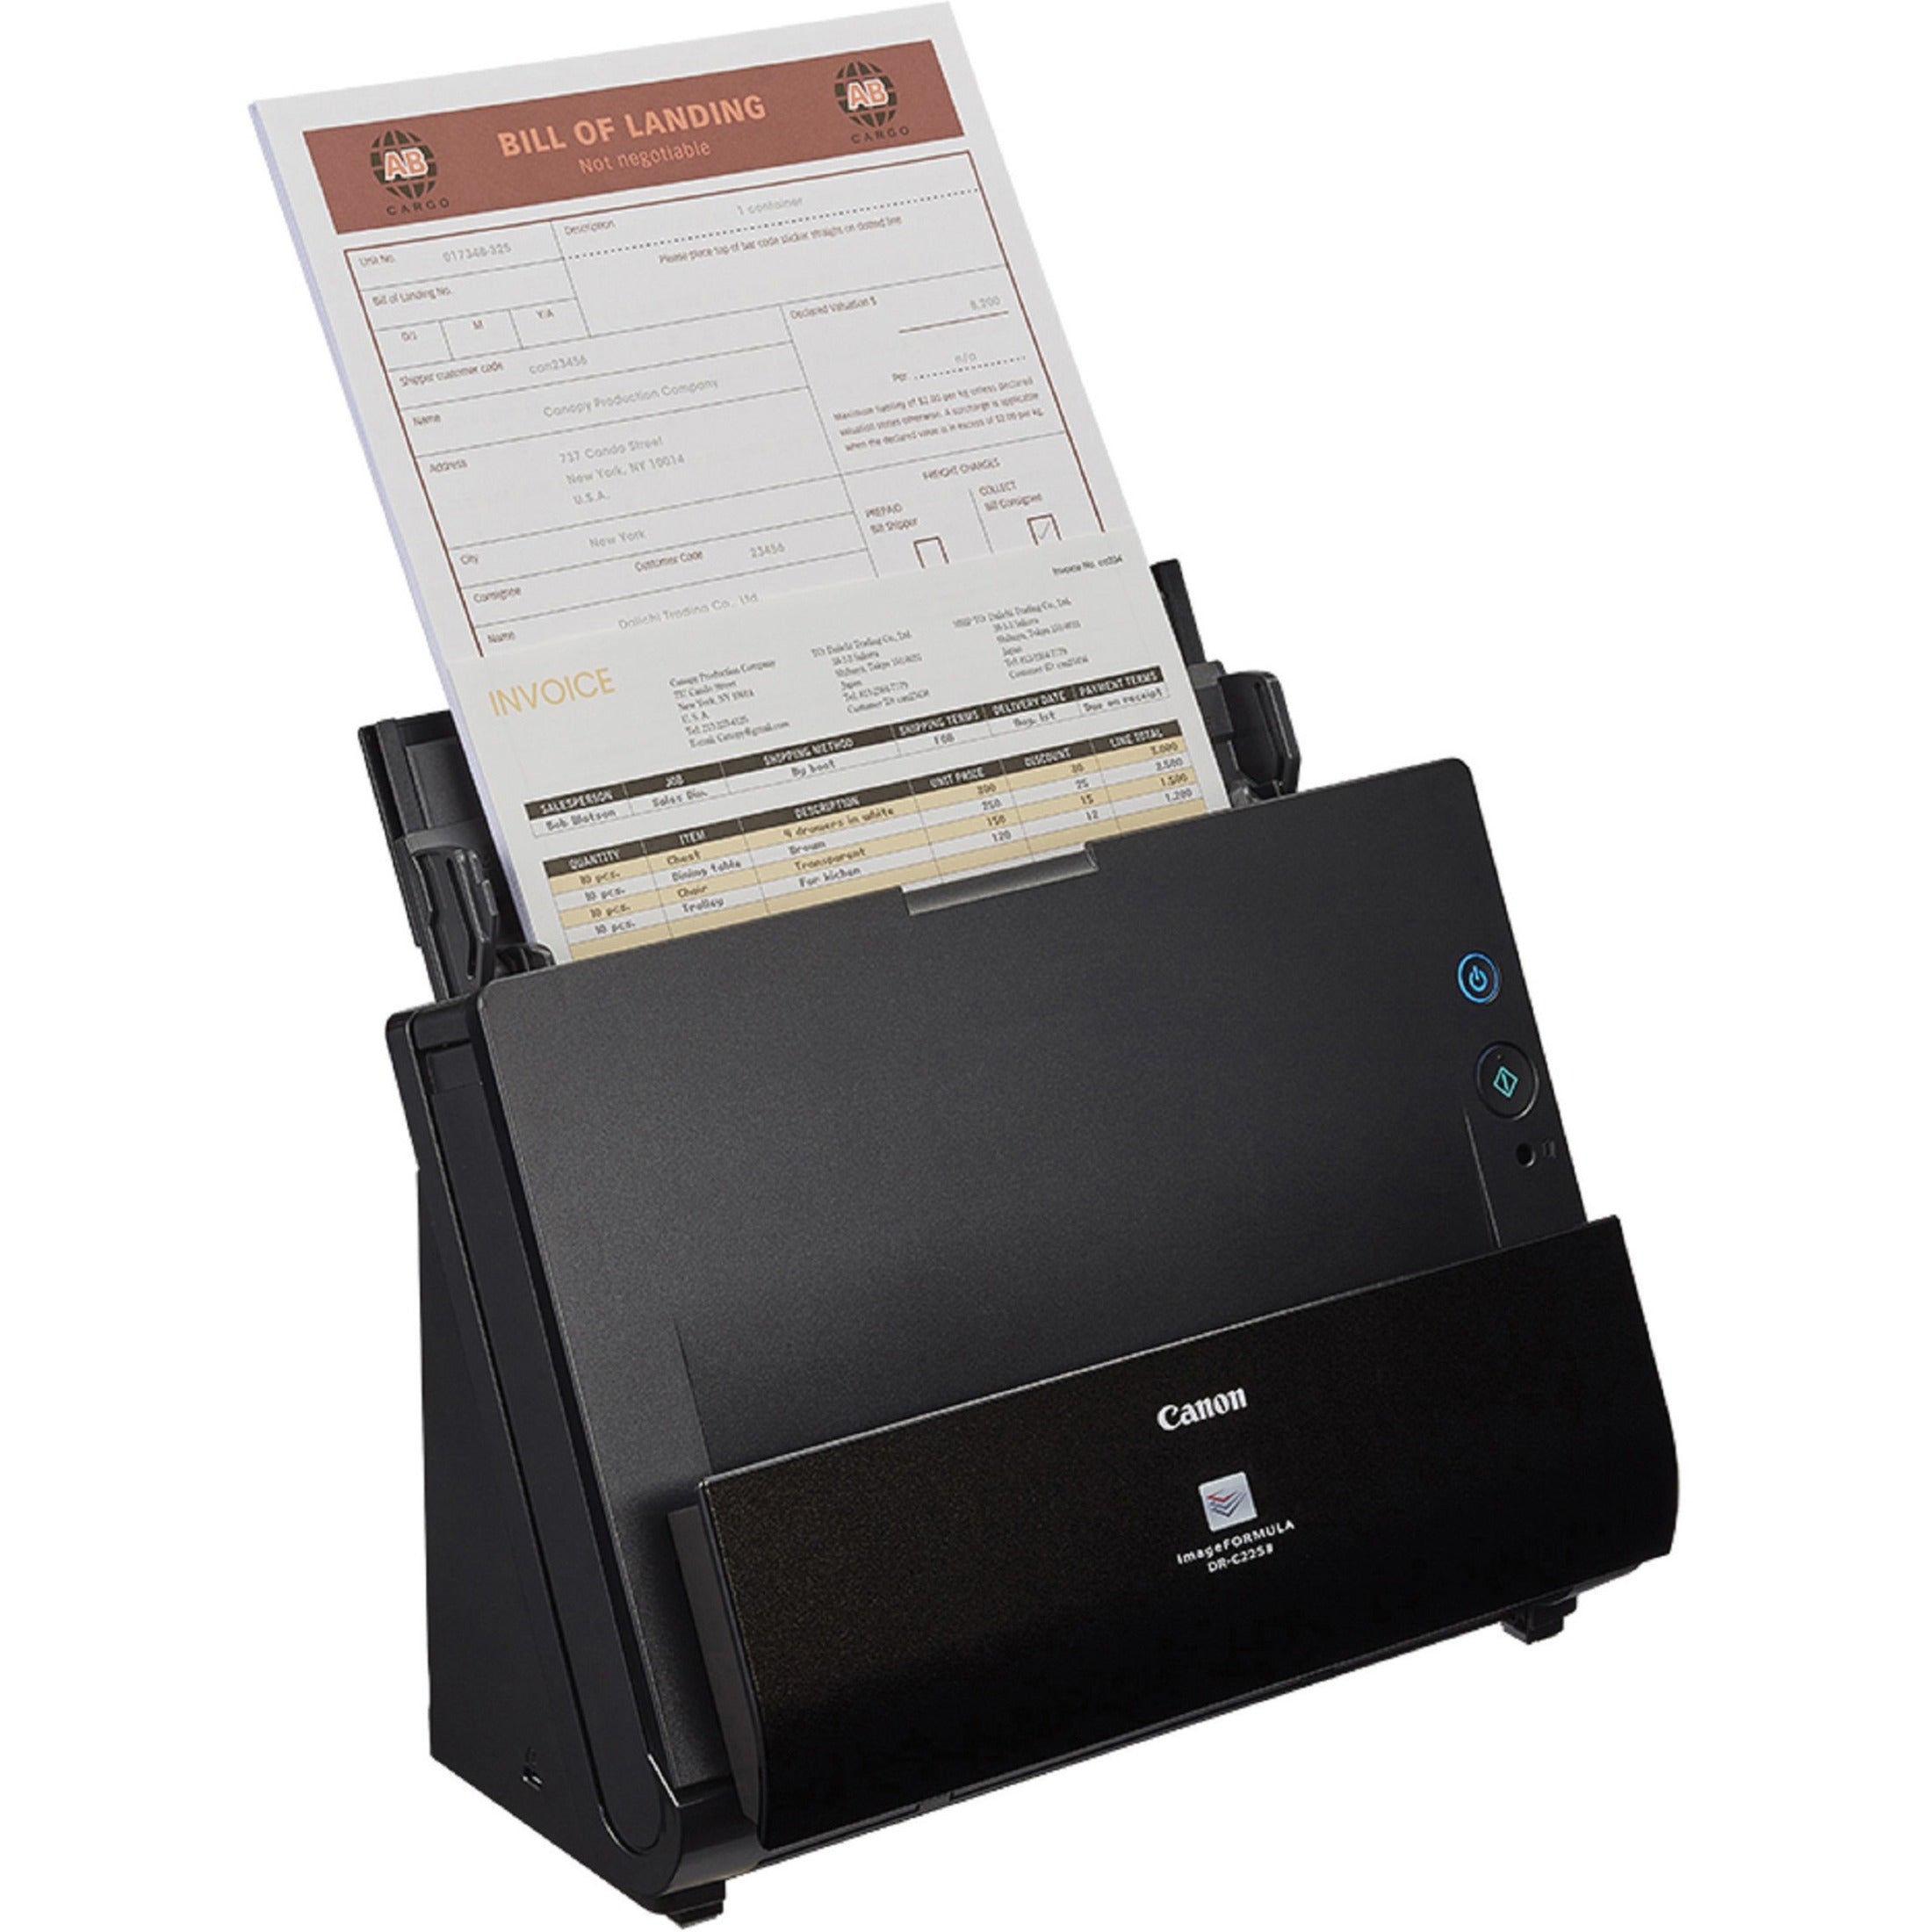 Canon 3258C002 imageFORMULA Sheetfed Scanner, 25ppm, Compact Design, USB Connectivity